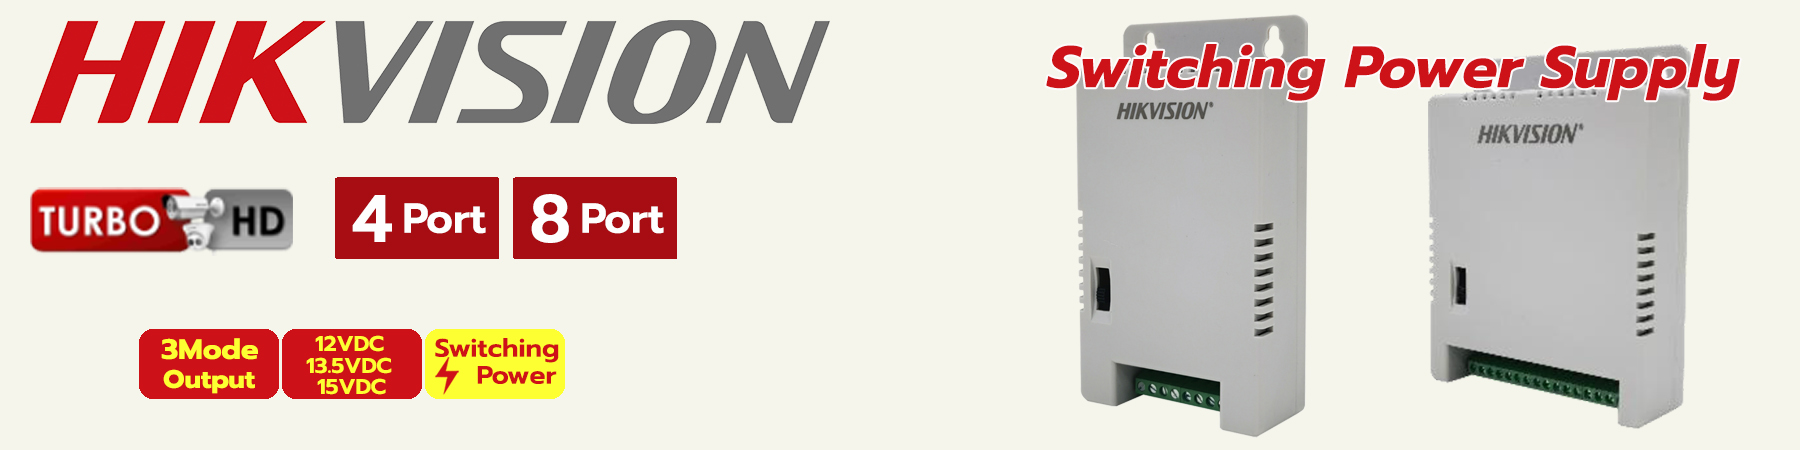 Hikvision Switching Power Supply, DS-2FA1225-C4, DS-2FA1205-C8, Hikvision Swiching 4Ports, Hikvision Swiching 8Ports